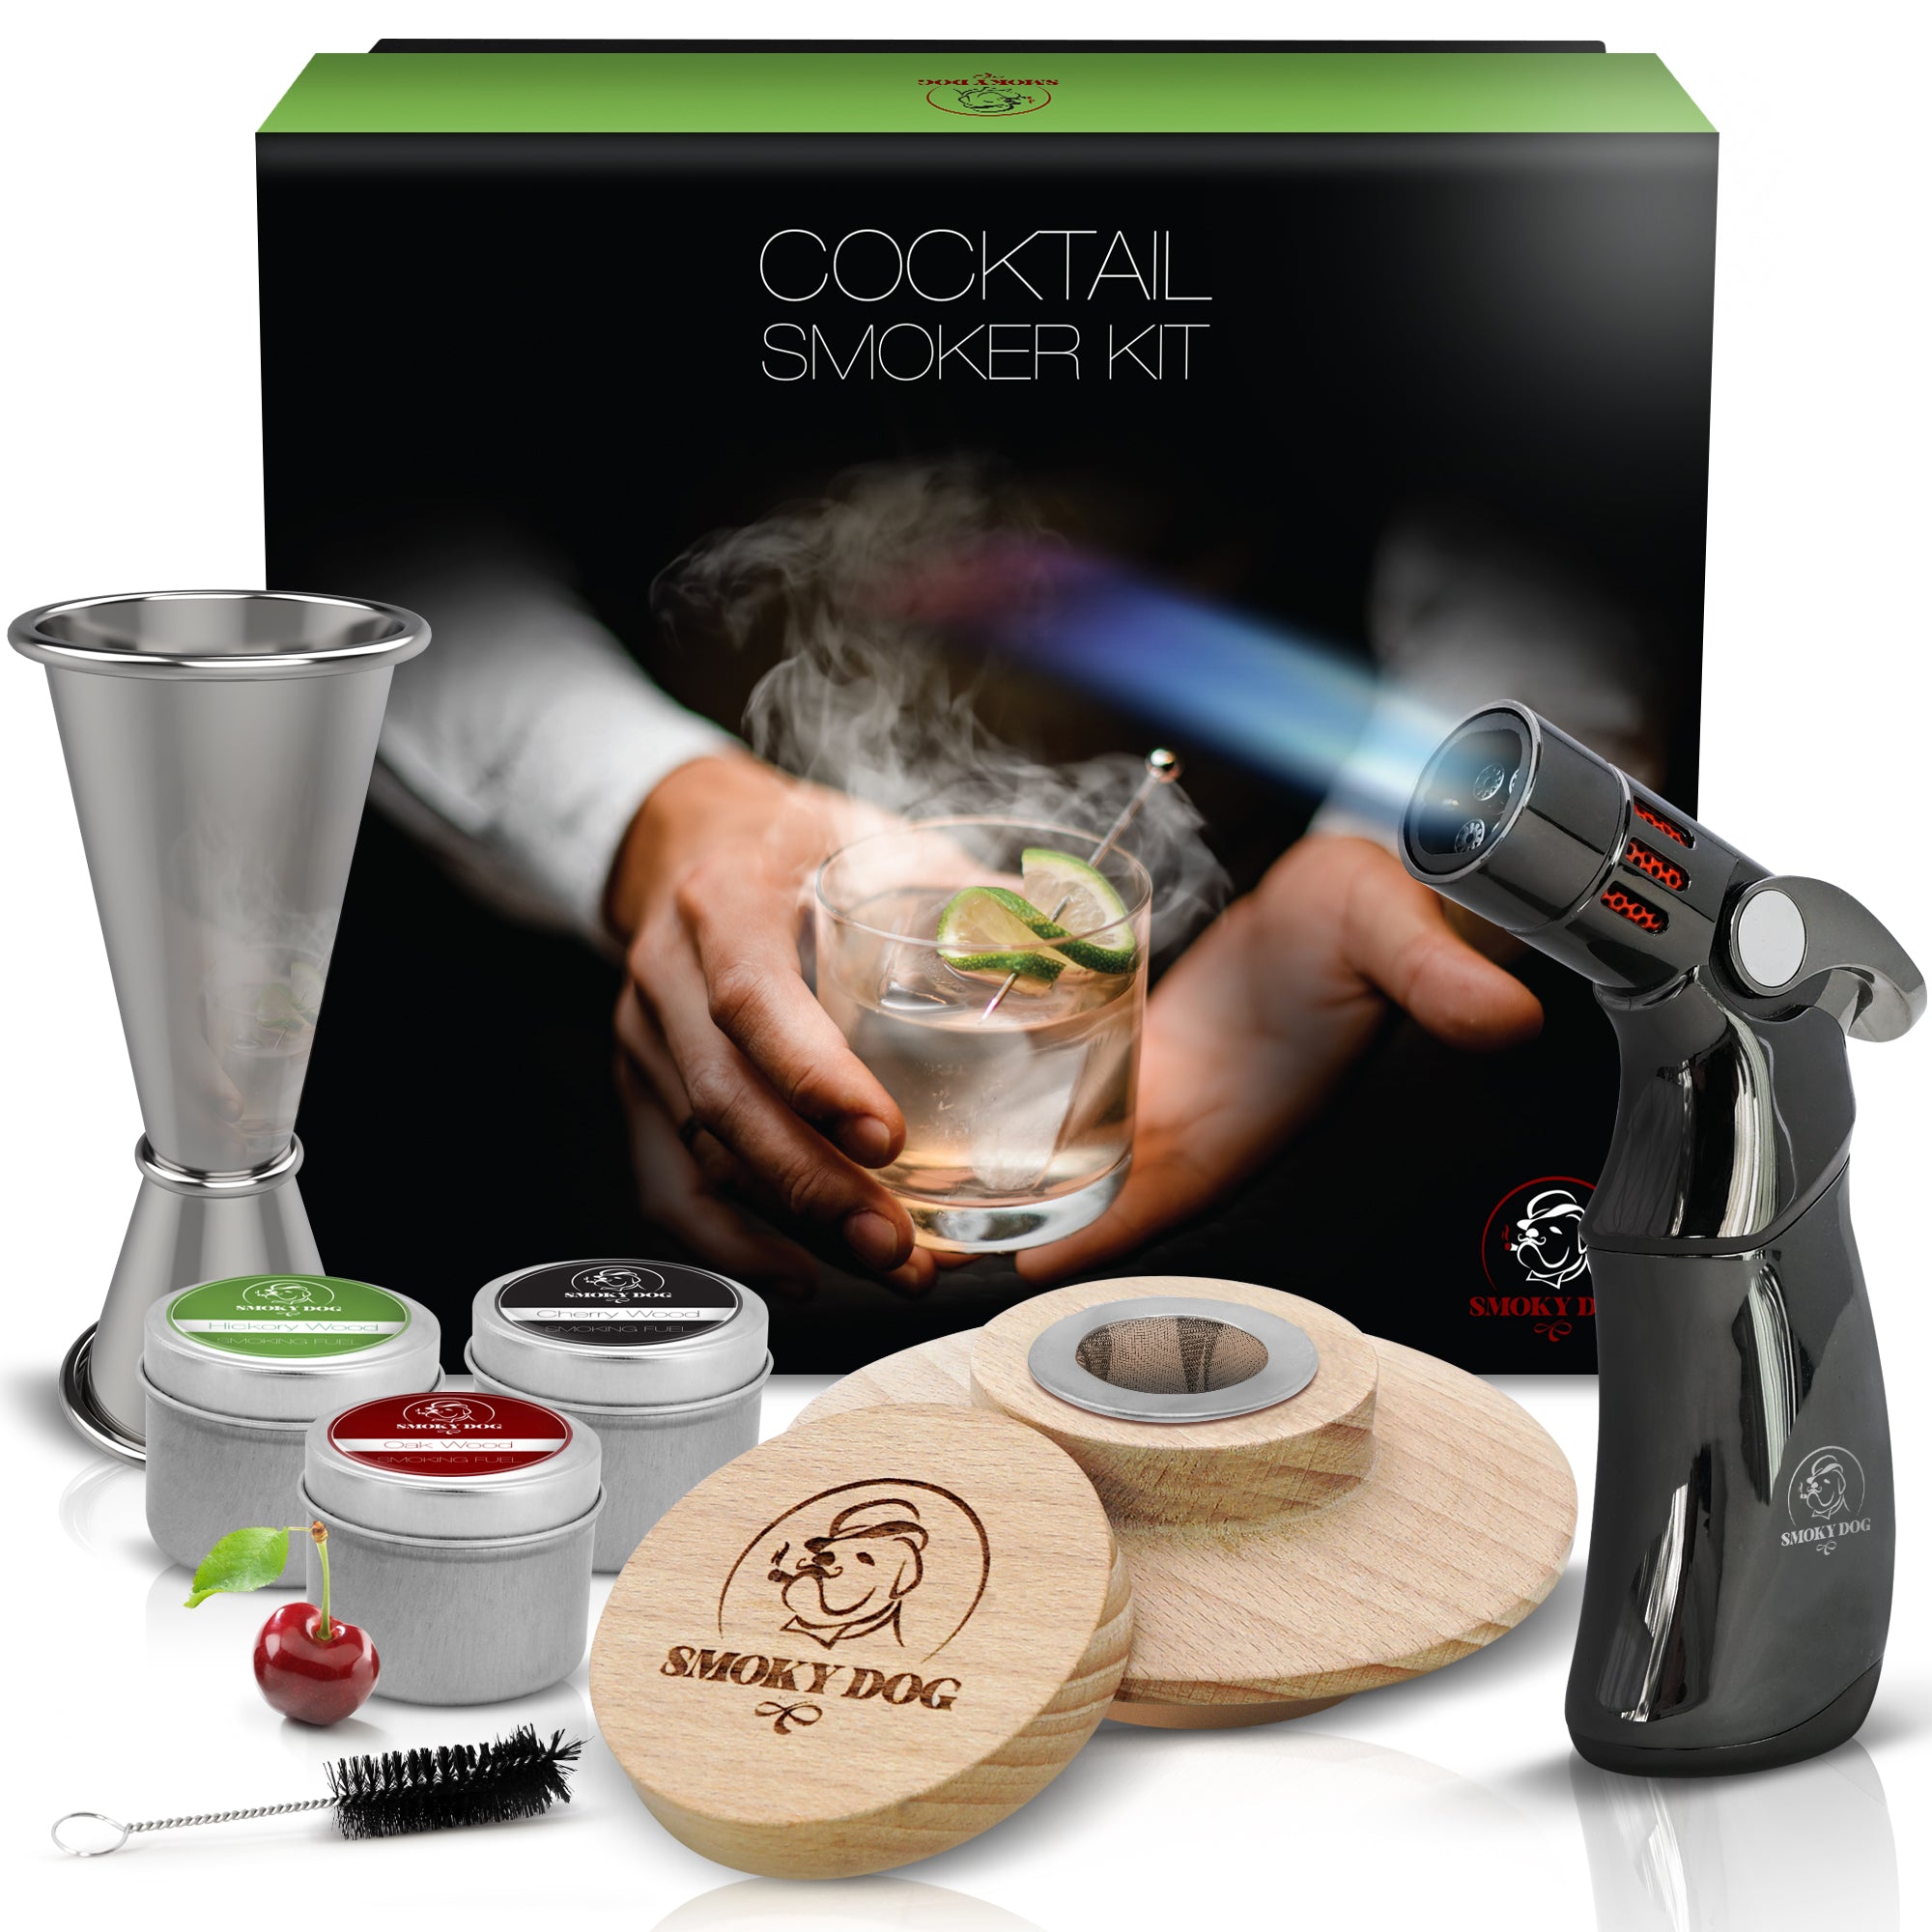 Smoky Dog Cocktail Smoker Kit With Torch for Whiskey and Old Fashioned Drinks, Mixology Bartender Kit Includes 3 Wood Chips, Jigger and a Premium Torch, Bourbon Gift for Men, Dad, Husband (No Butane)